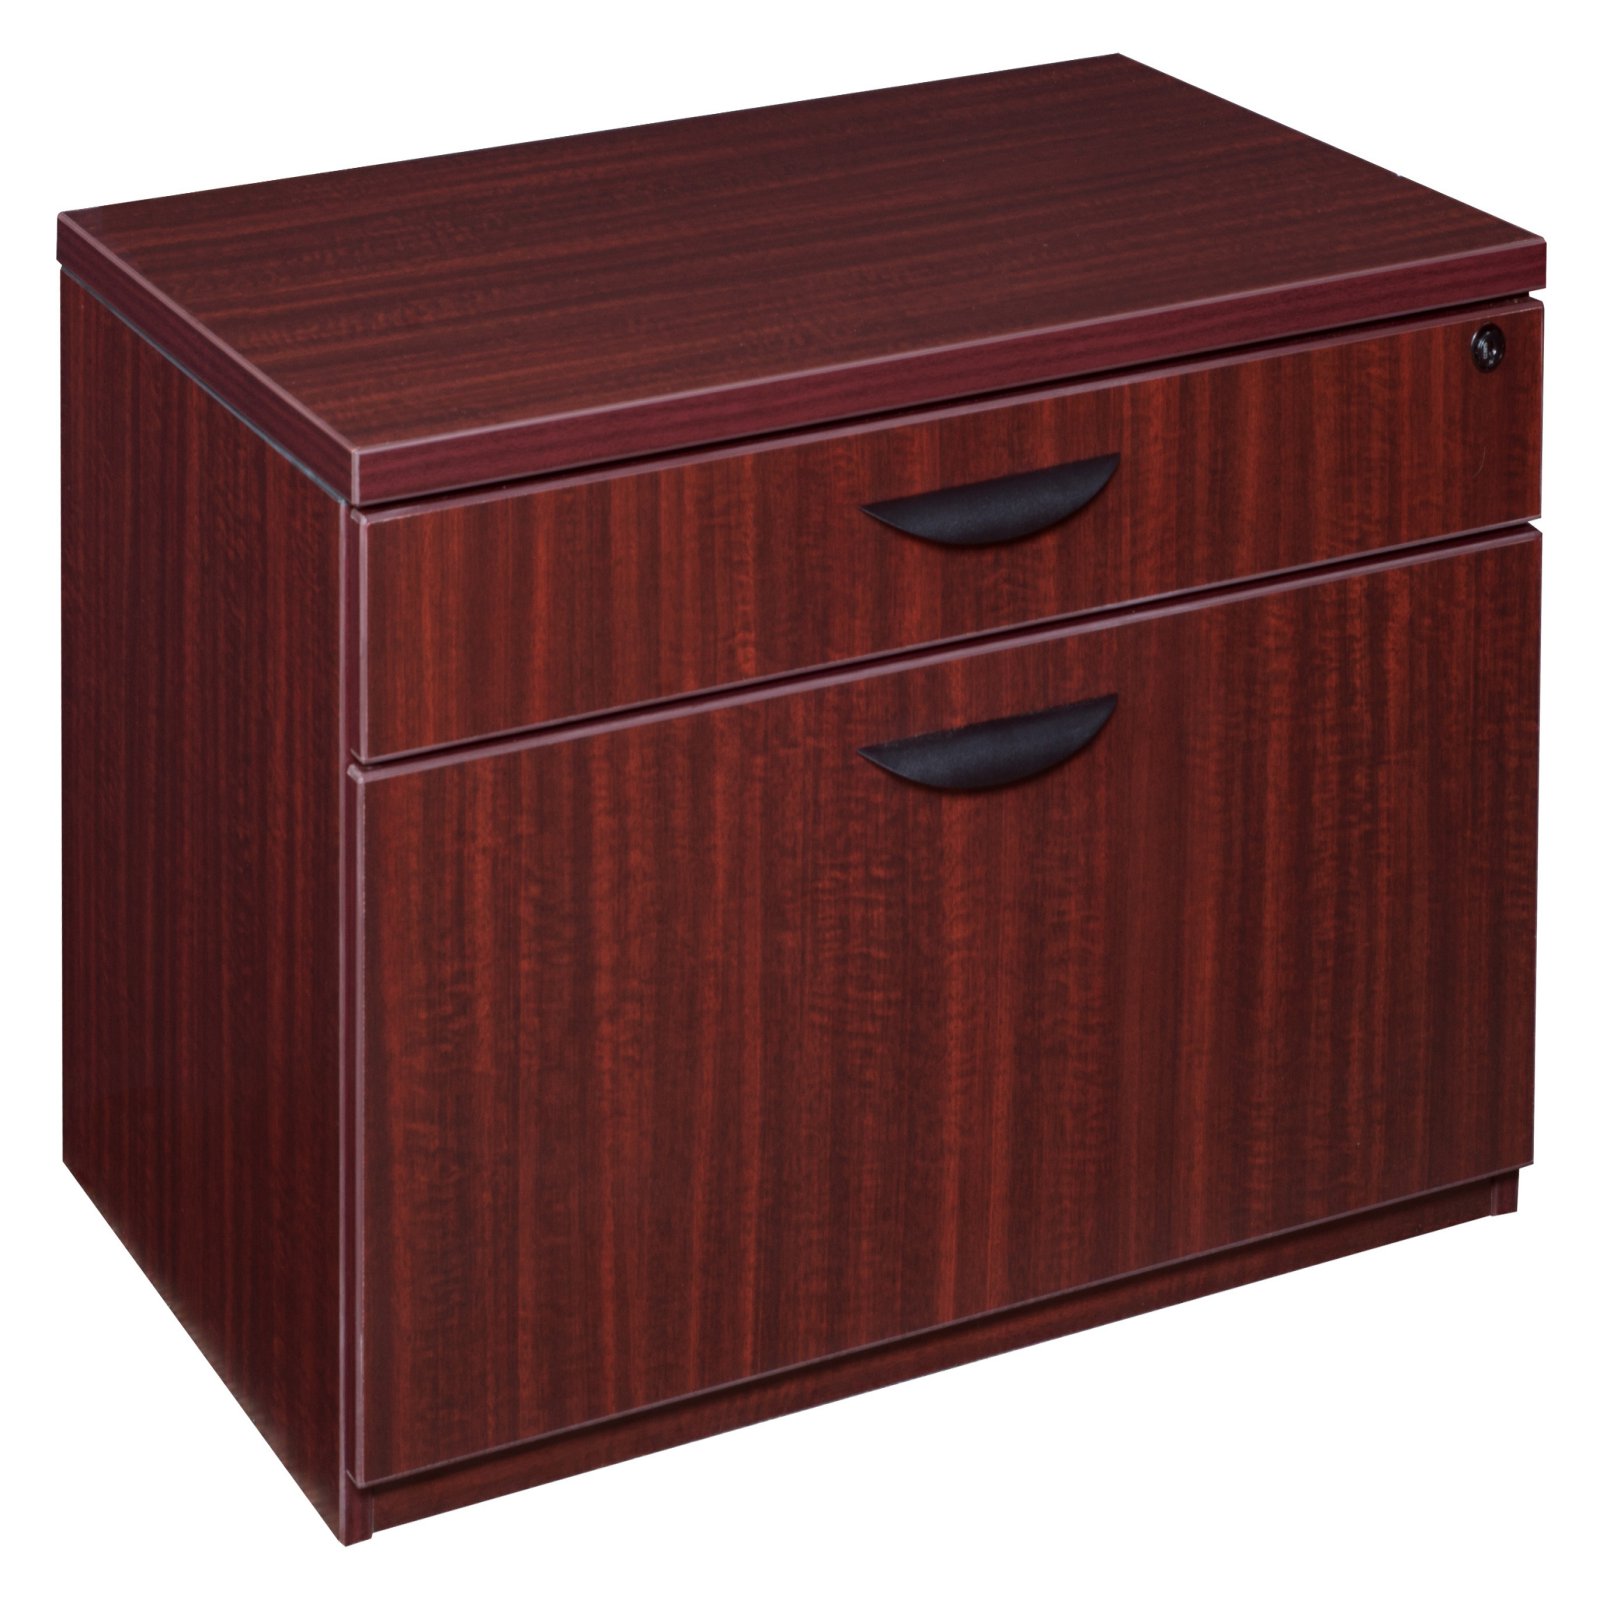 Regency Legacy 20 in. 2 Drawer Low Lateral File- Mahogany - image 1 of 7